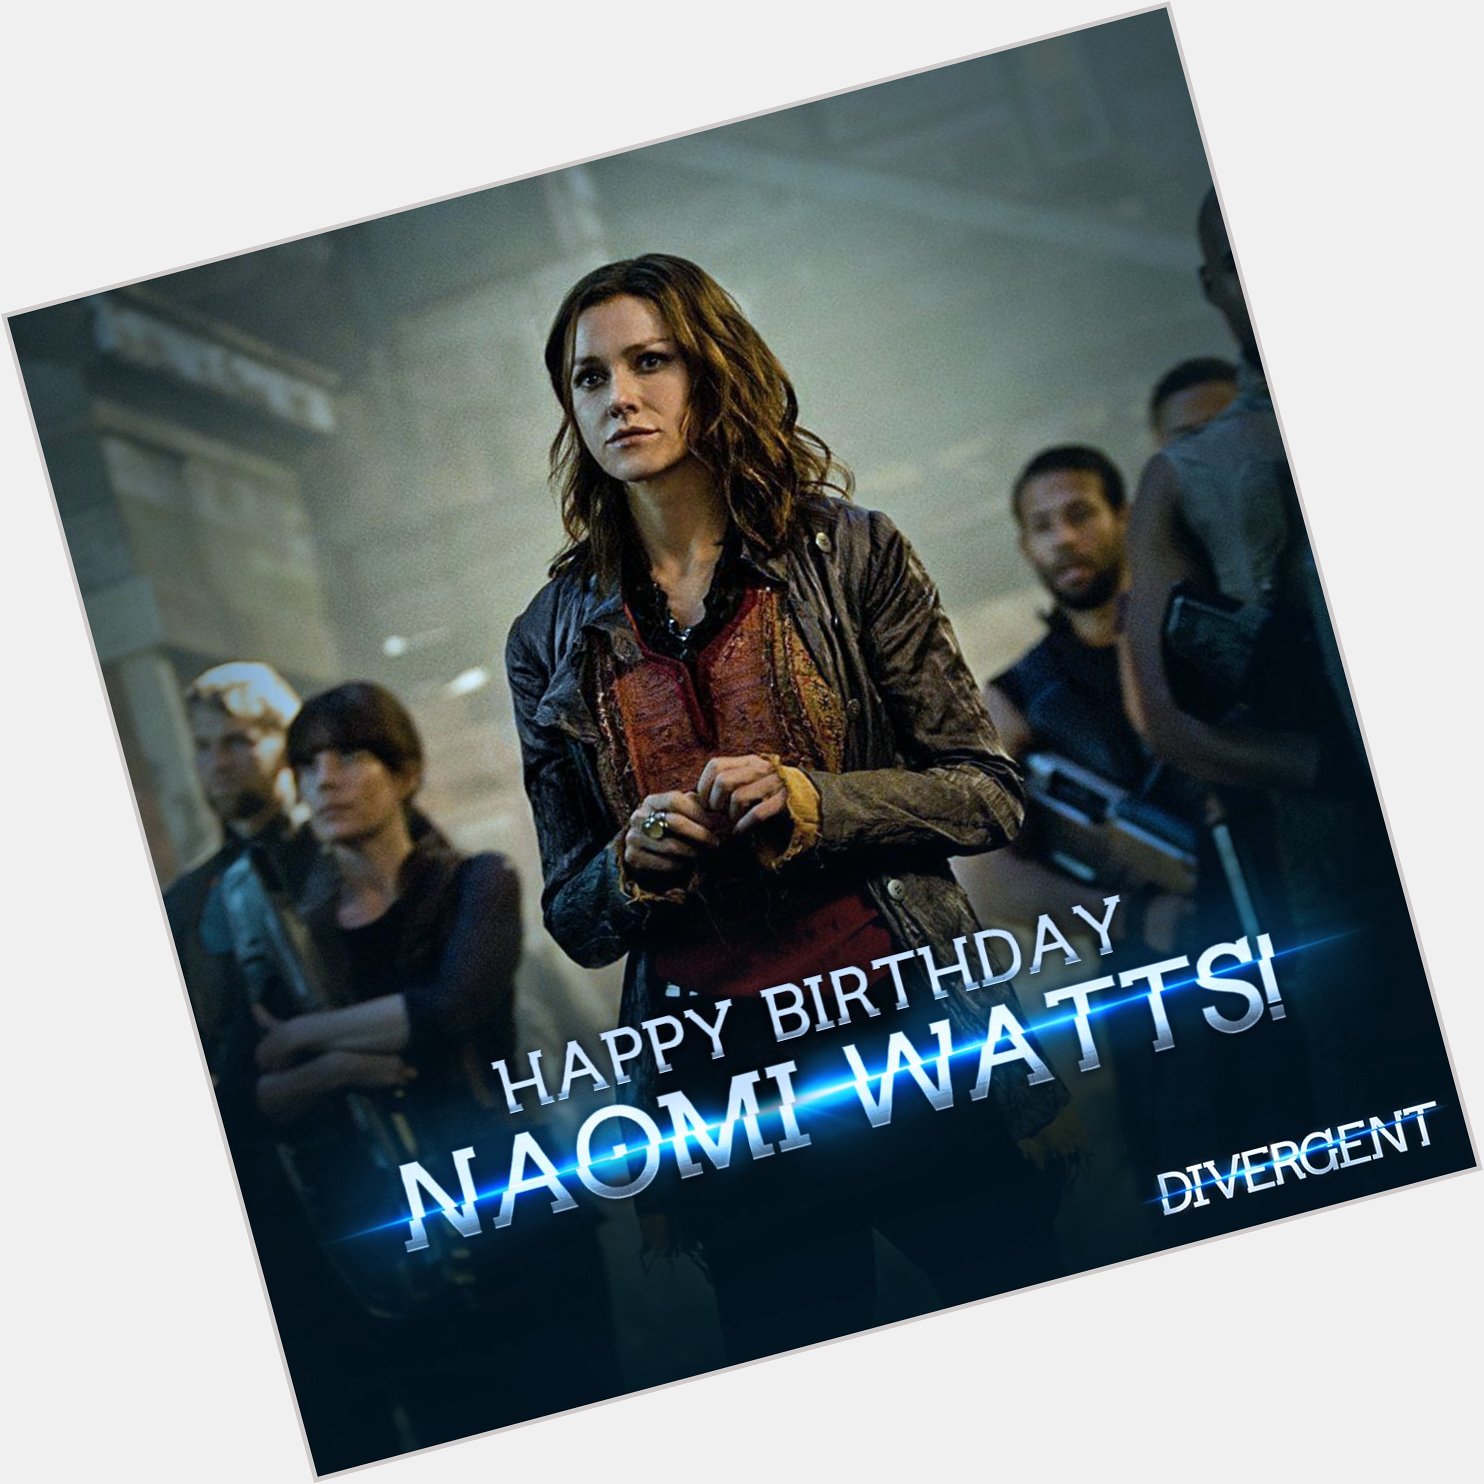 Join us in wishing the talented Naomi Watts a happy birthday! 